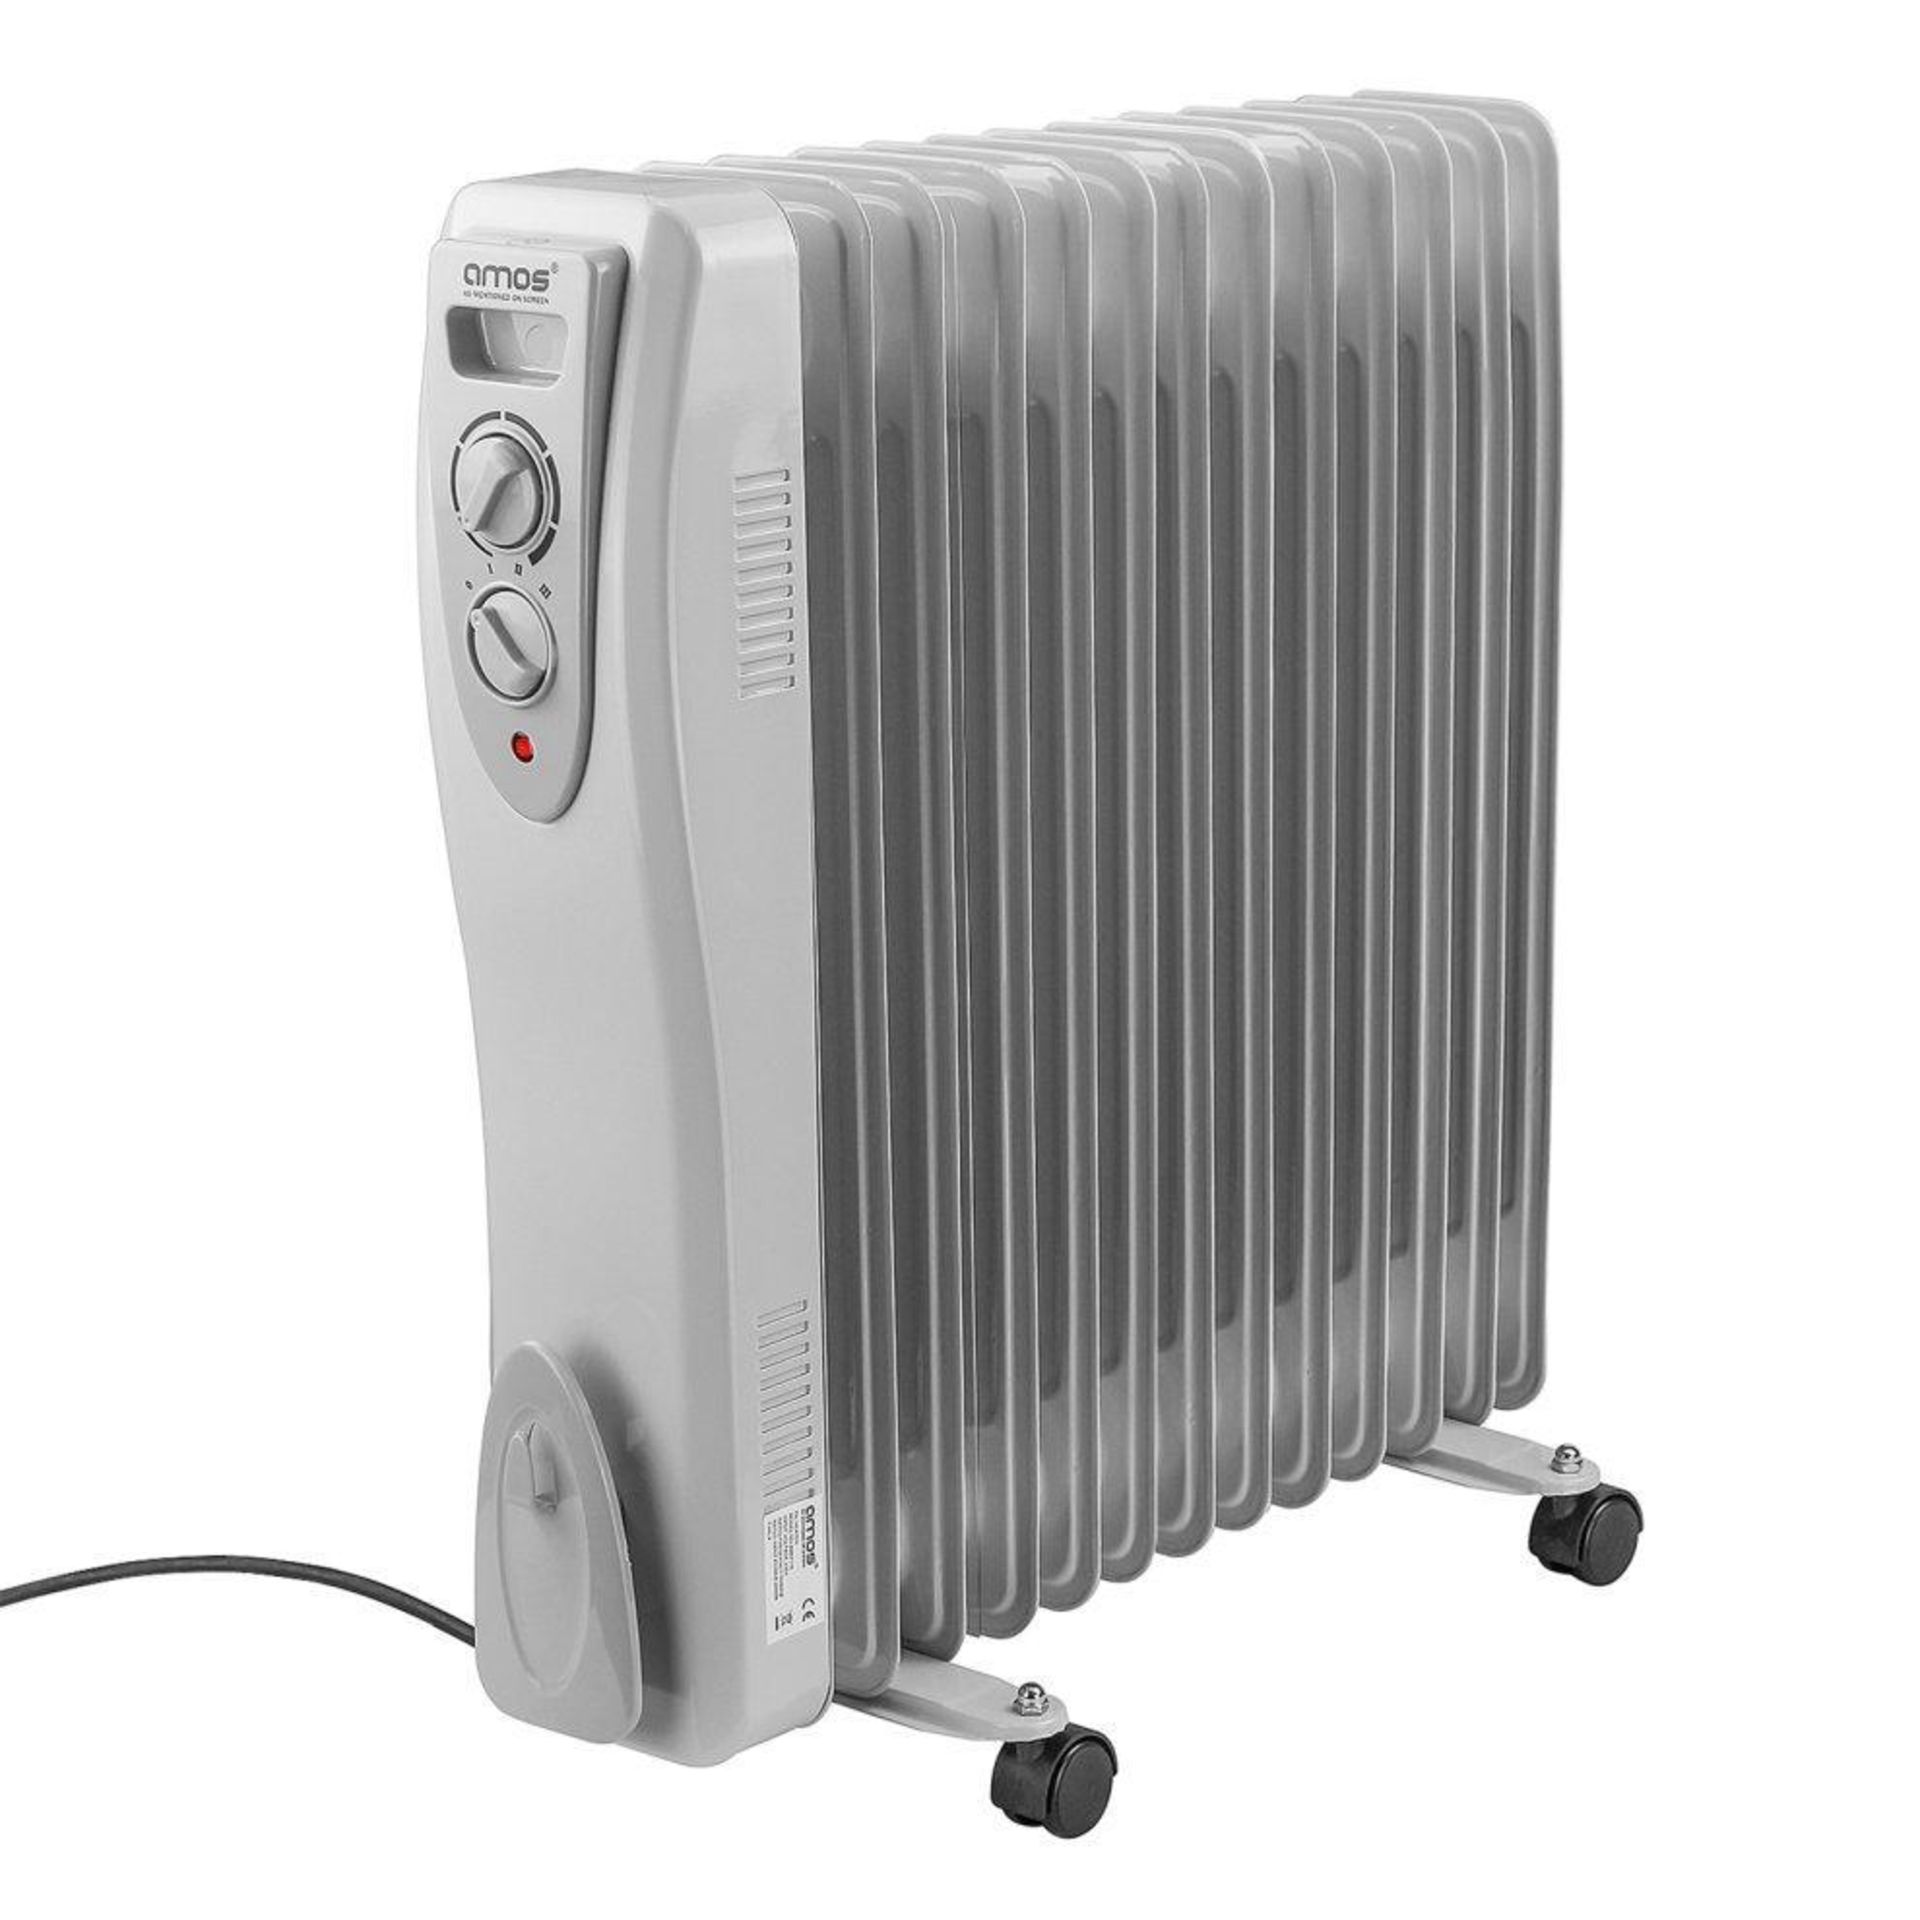 AMOS 13 Fin 3000W Oil Filled Radiator 3 Setting Thermostat Heater (ER44)